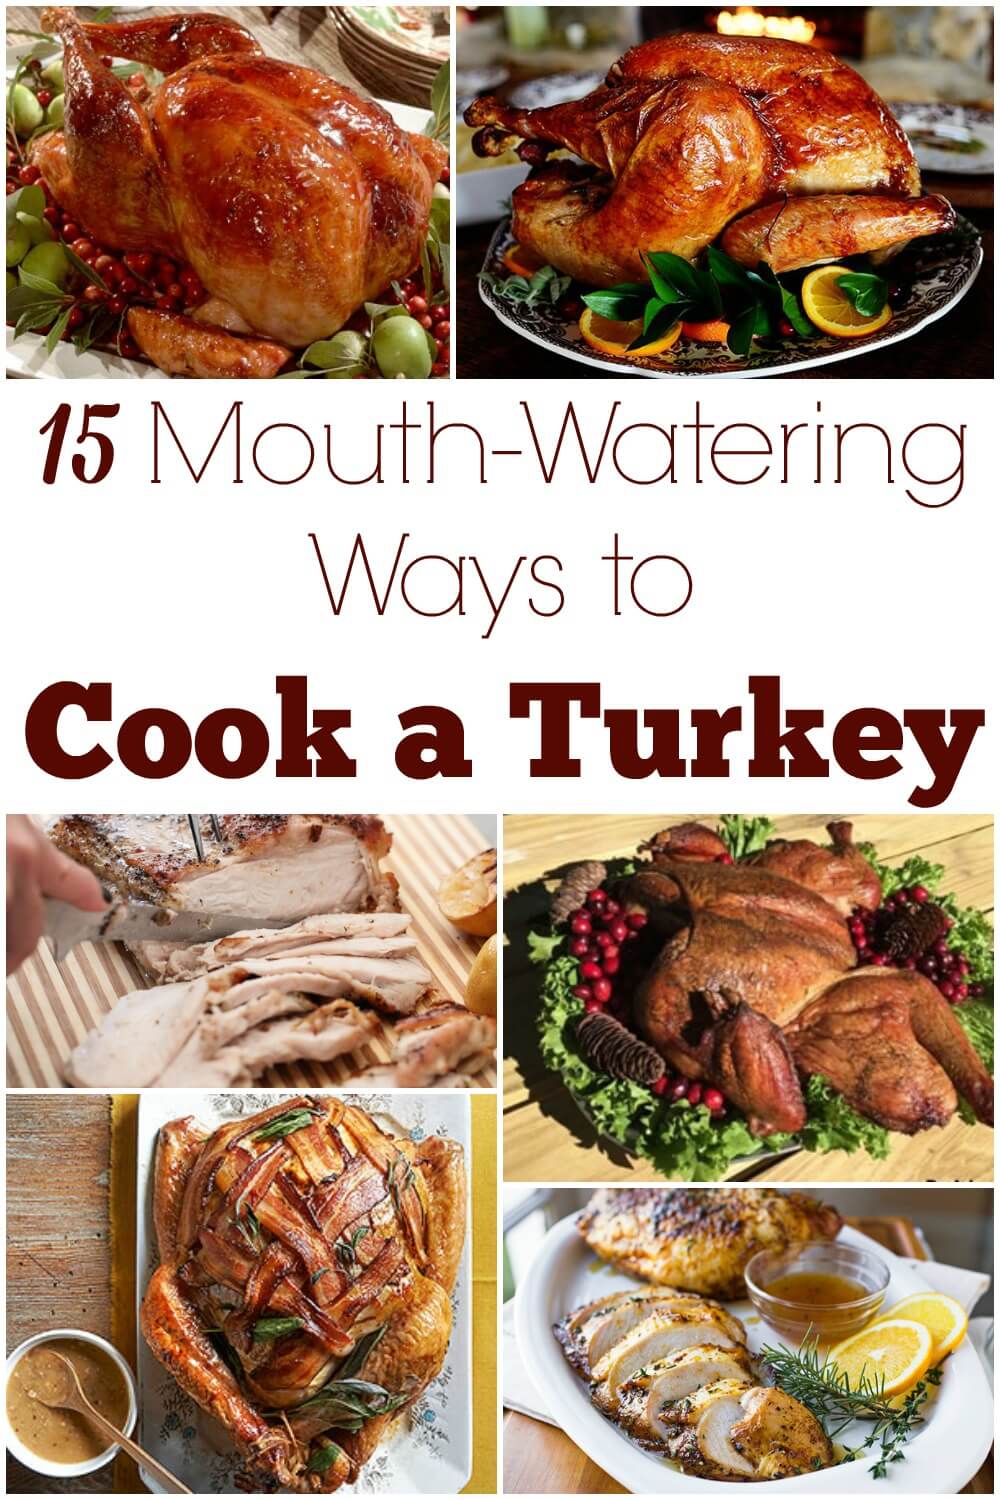 If you're looking for a can't miss recipe for your Thanksgiving or Christmas bird, check out this roundup of 15 creative, delicious ways to cook a turkey.